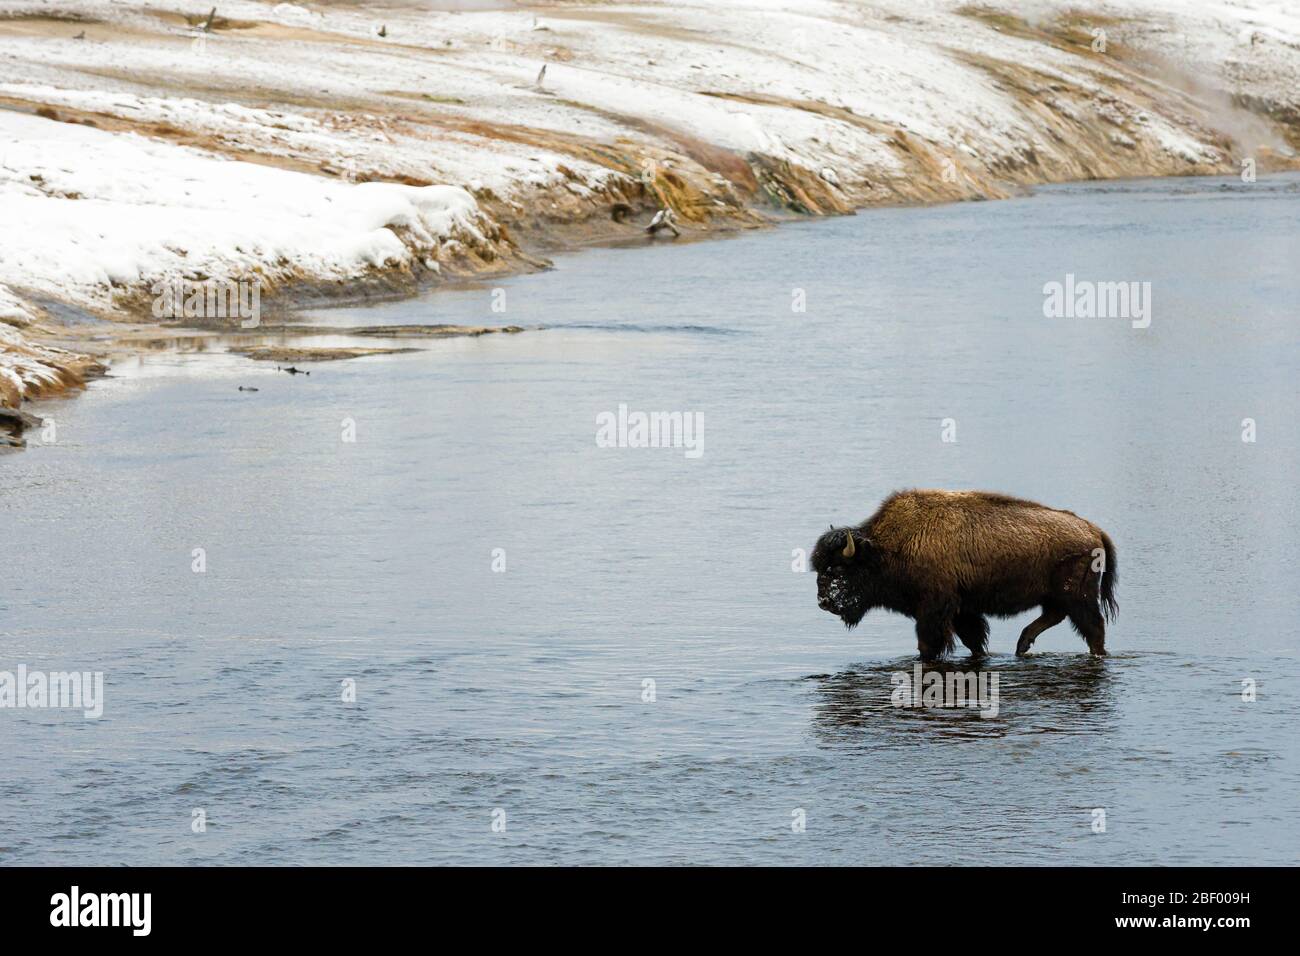 American bison in Yellowstone National Park Montana USA Stock Photo